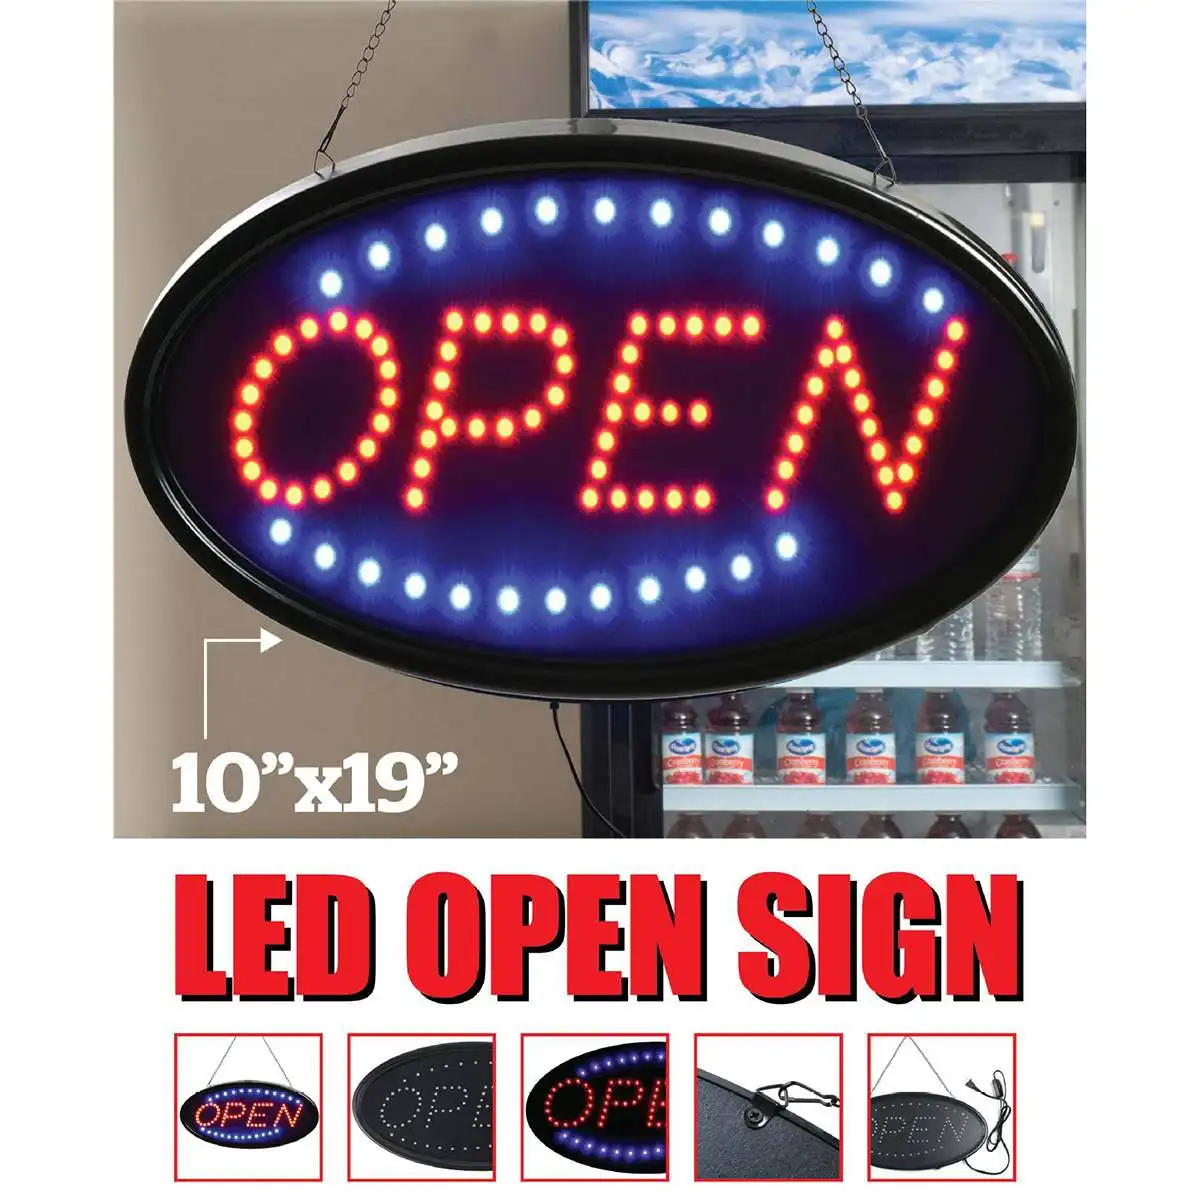 Details about   Open Sign Neon Blue LED Light Bulb Commercial Lighting Business Shop Display 